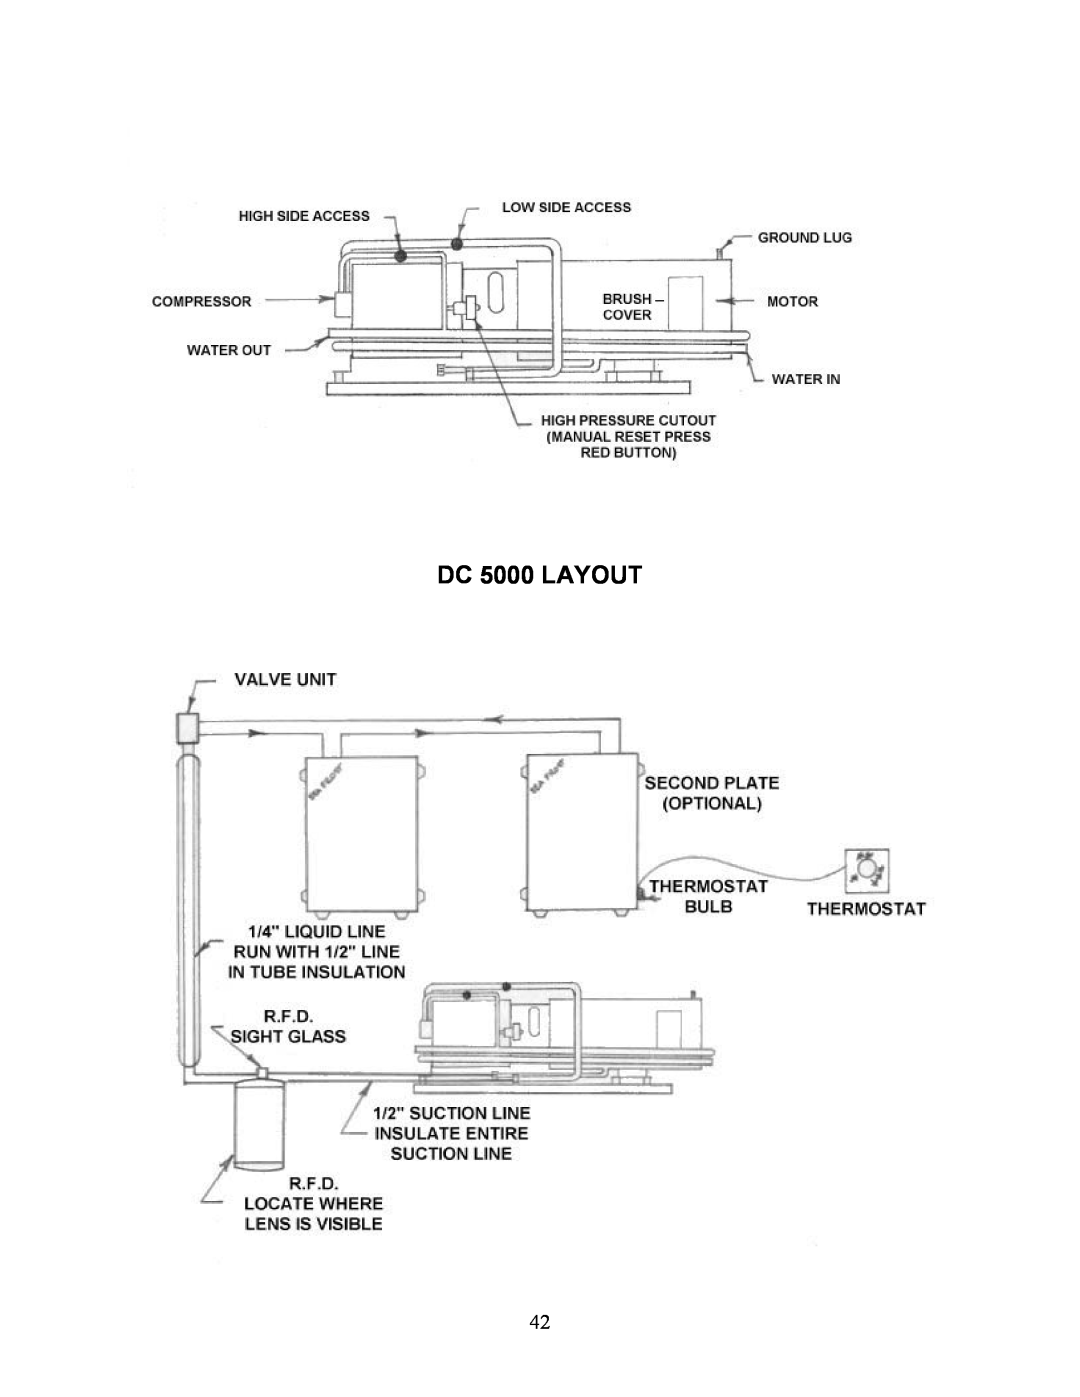 Sea Frost installation instructions DC 5000 LAYOUT 